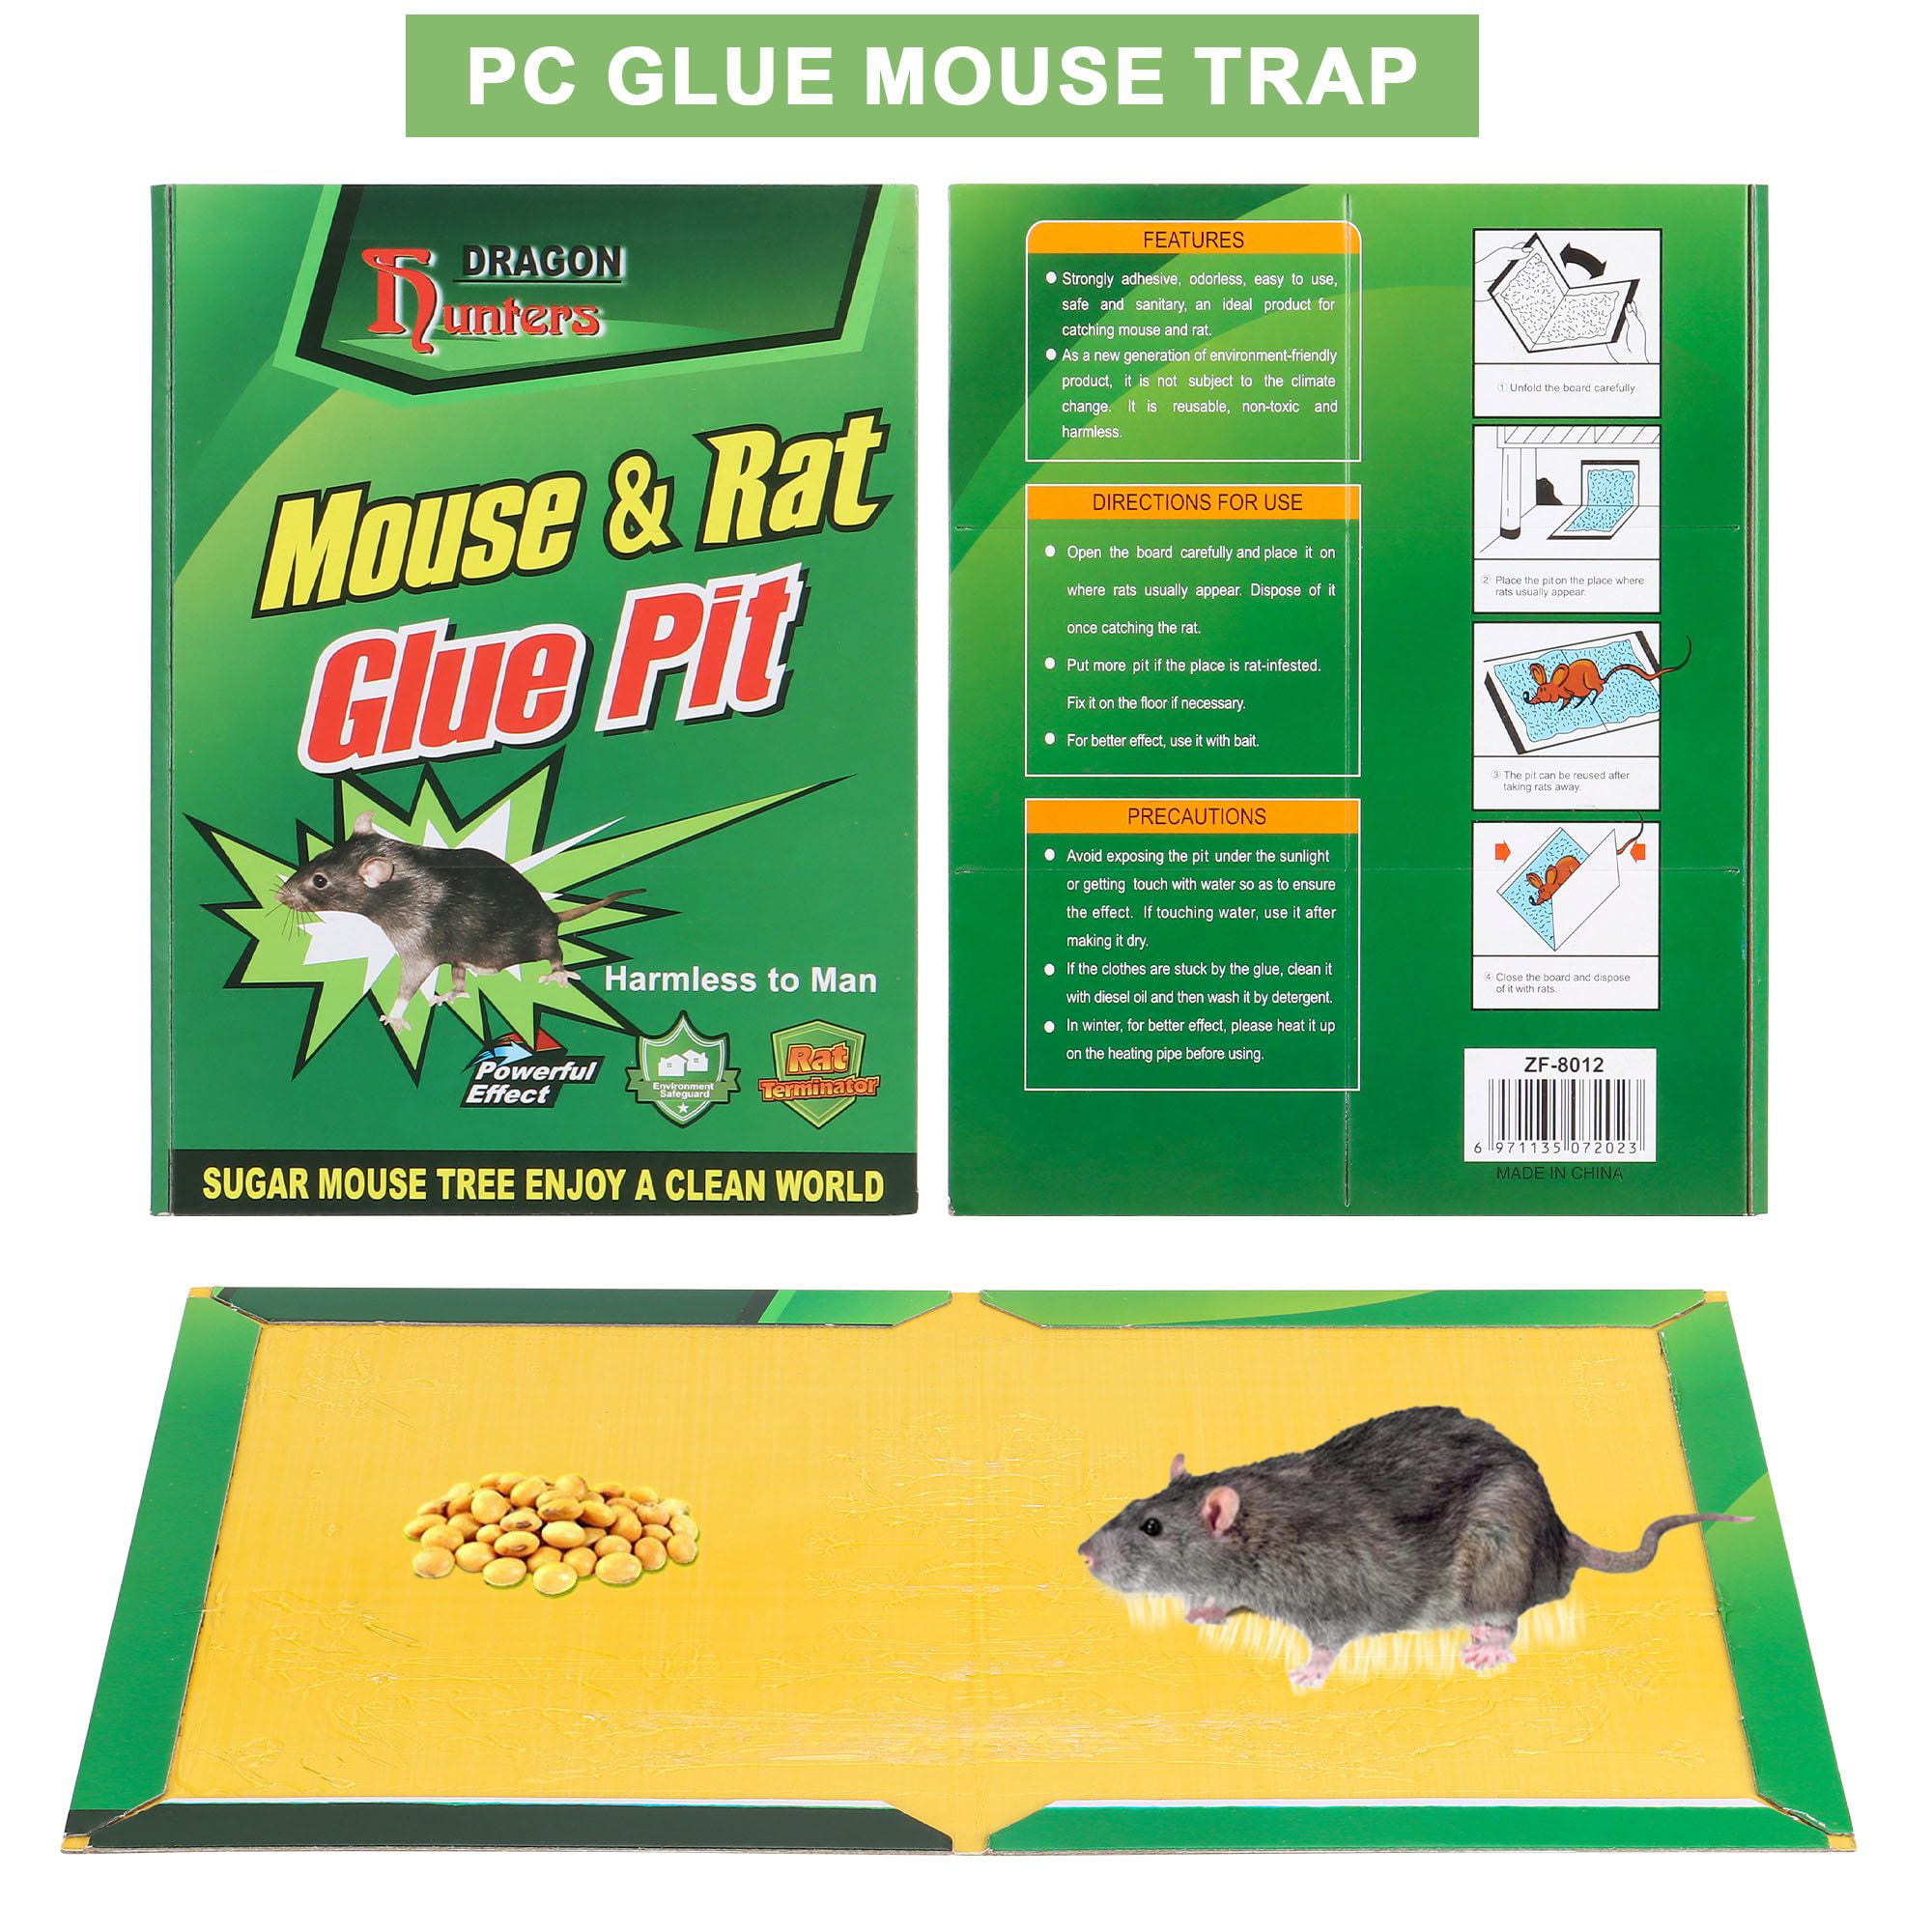 LULUCATCH Super Glue Traps 36 Pack for Mice & Snakes, Larger, Heavier  Sticky Traps with Non-Toxic Glue. Sticky Mouse Traps Indoor, Easy to Set,  Safe